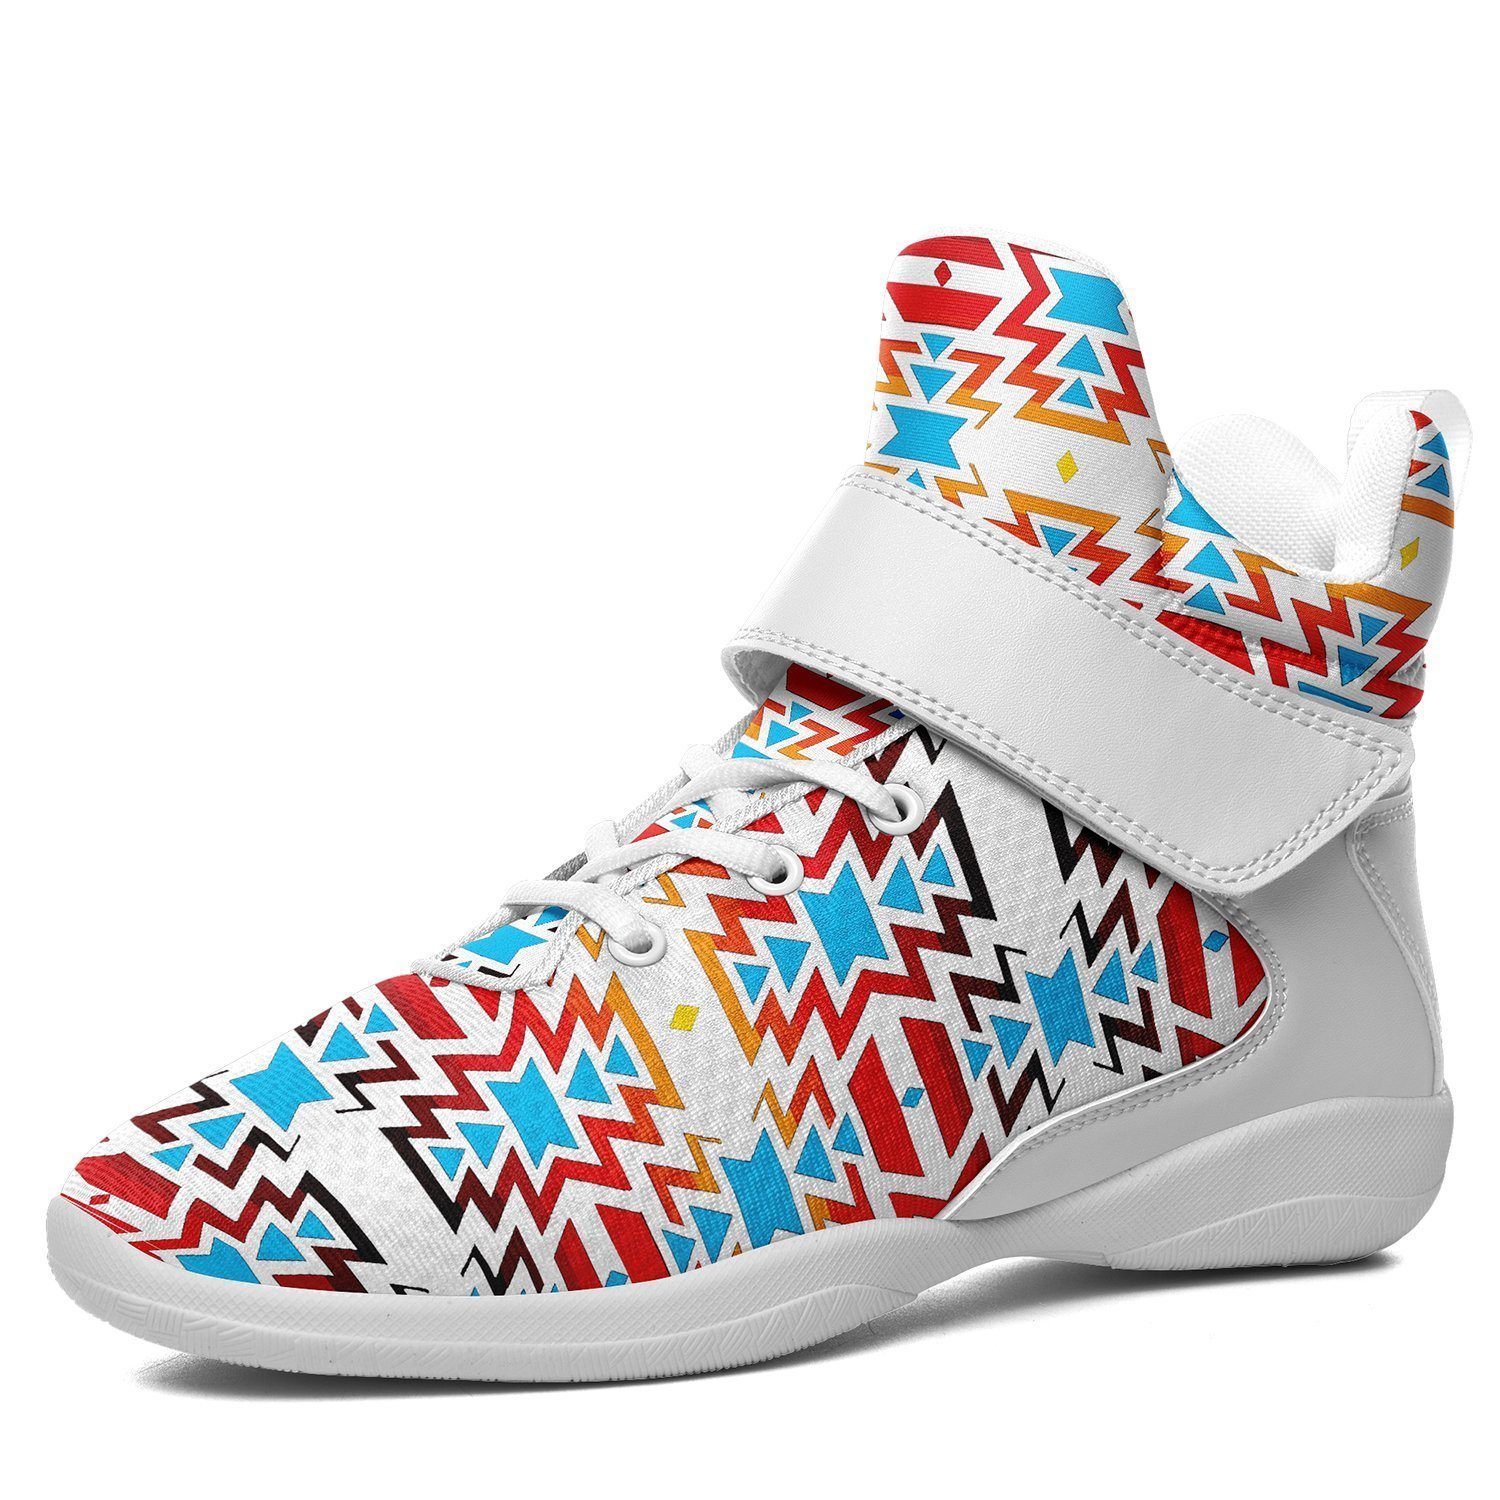 Fire Colors and Sky Ipottaa Basketball / Sport High Top Shoes - White Sole 49 Dzine US Men 7 / EUR 40 White Sole with White Strap 